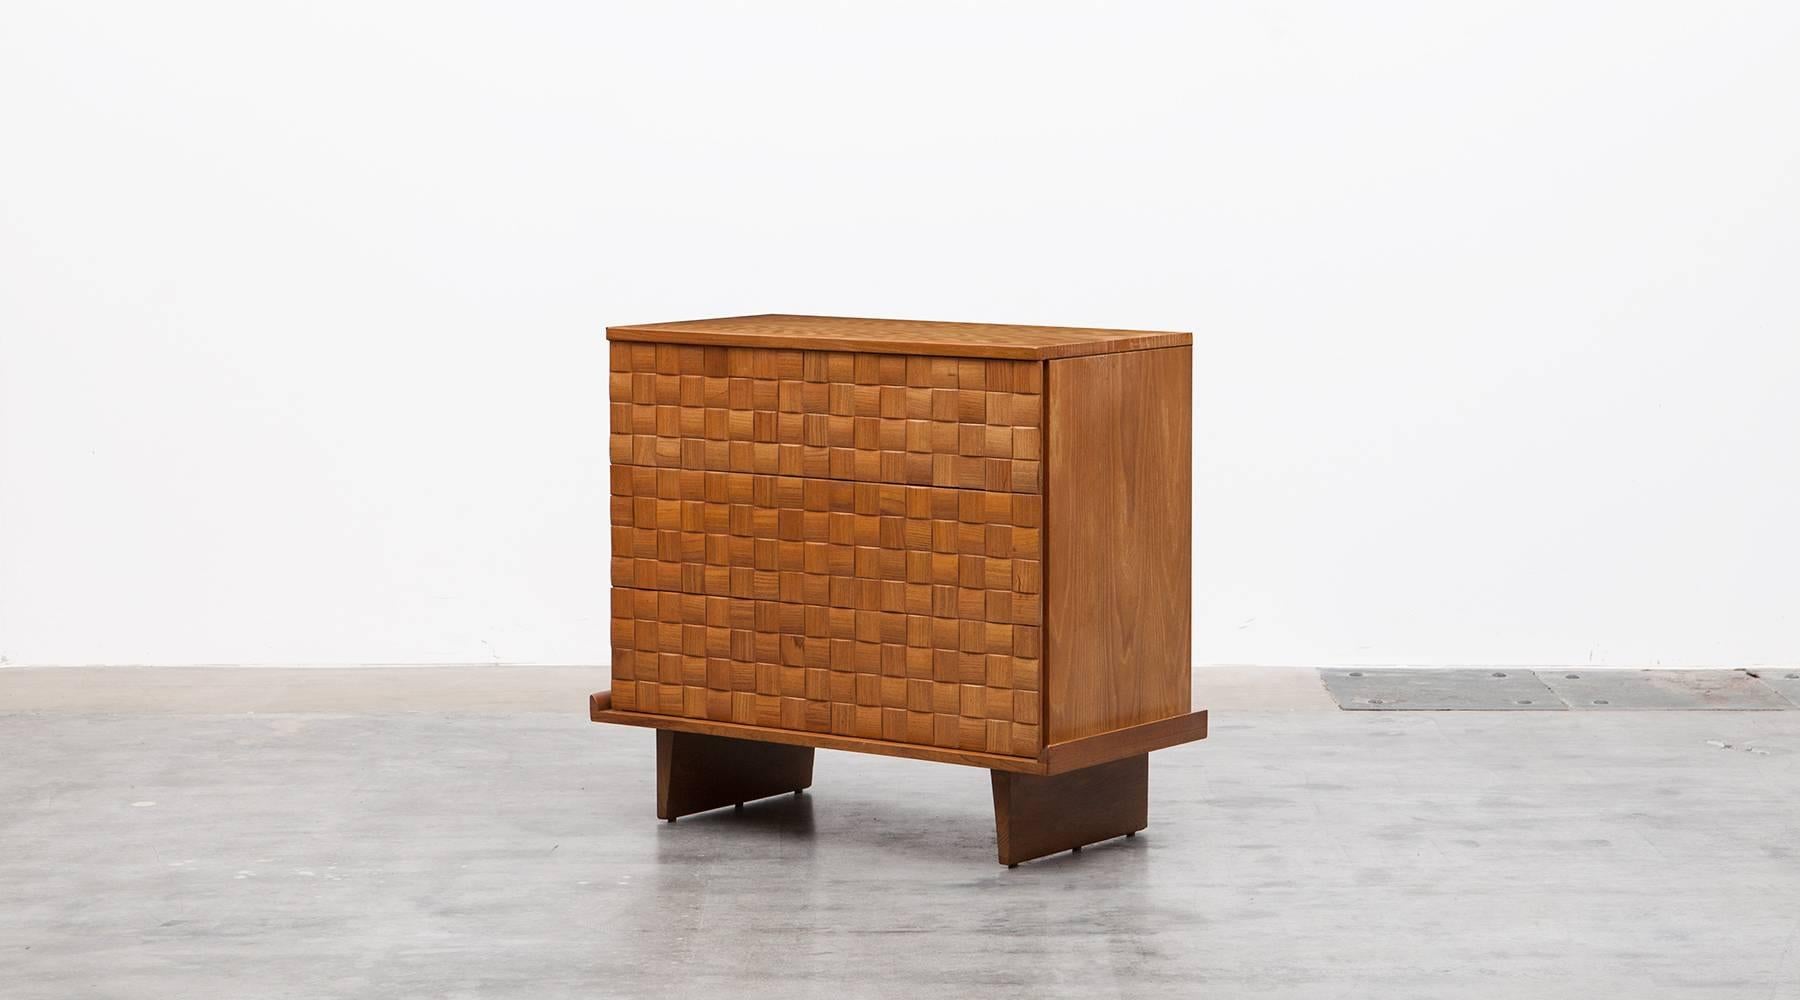 Handsome ash cabinet designed by Paul Laszlo features three of his basket weave drawer fronts and modern shaped legs. The sideboard comes in very good original condition. Manufactured by Brown Saltman.